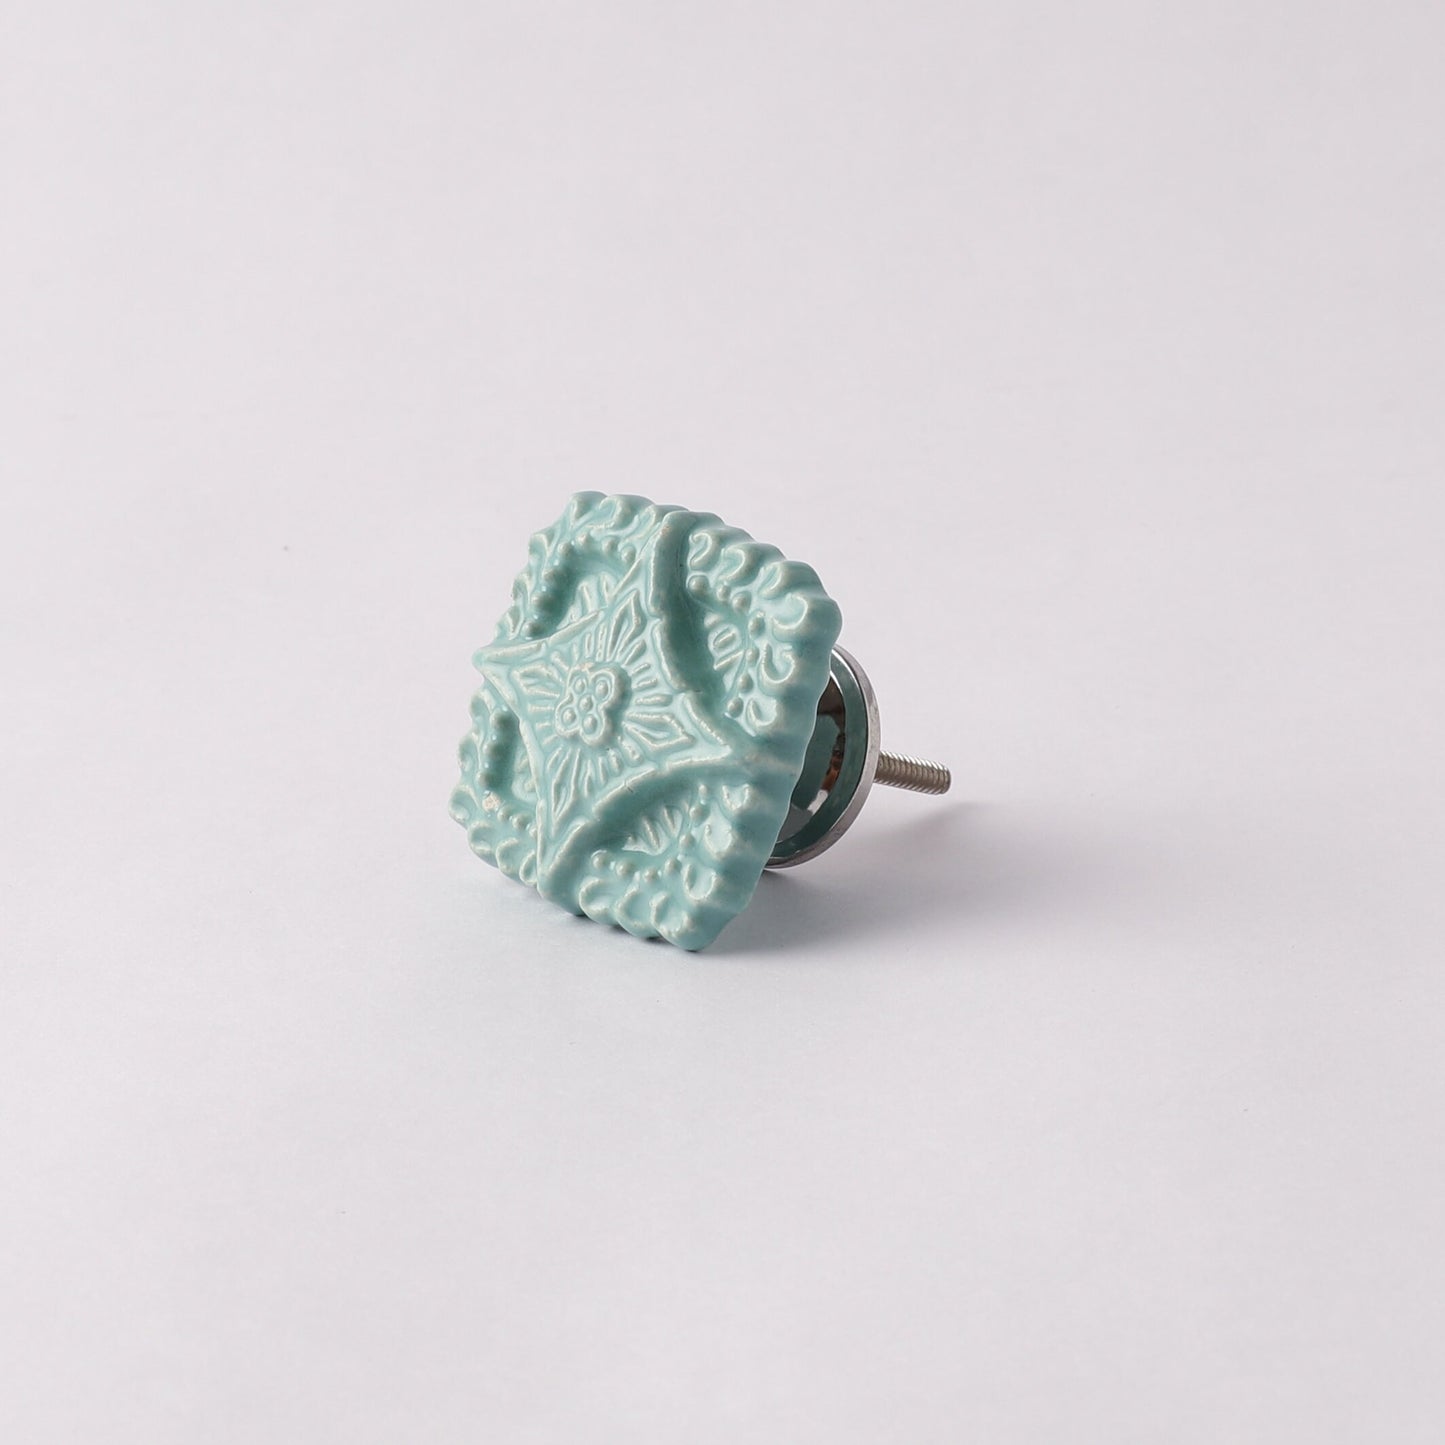 Teal and Pink Square Style Ceramic Pull Knob (C3)